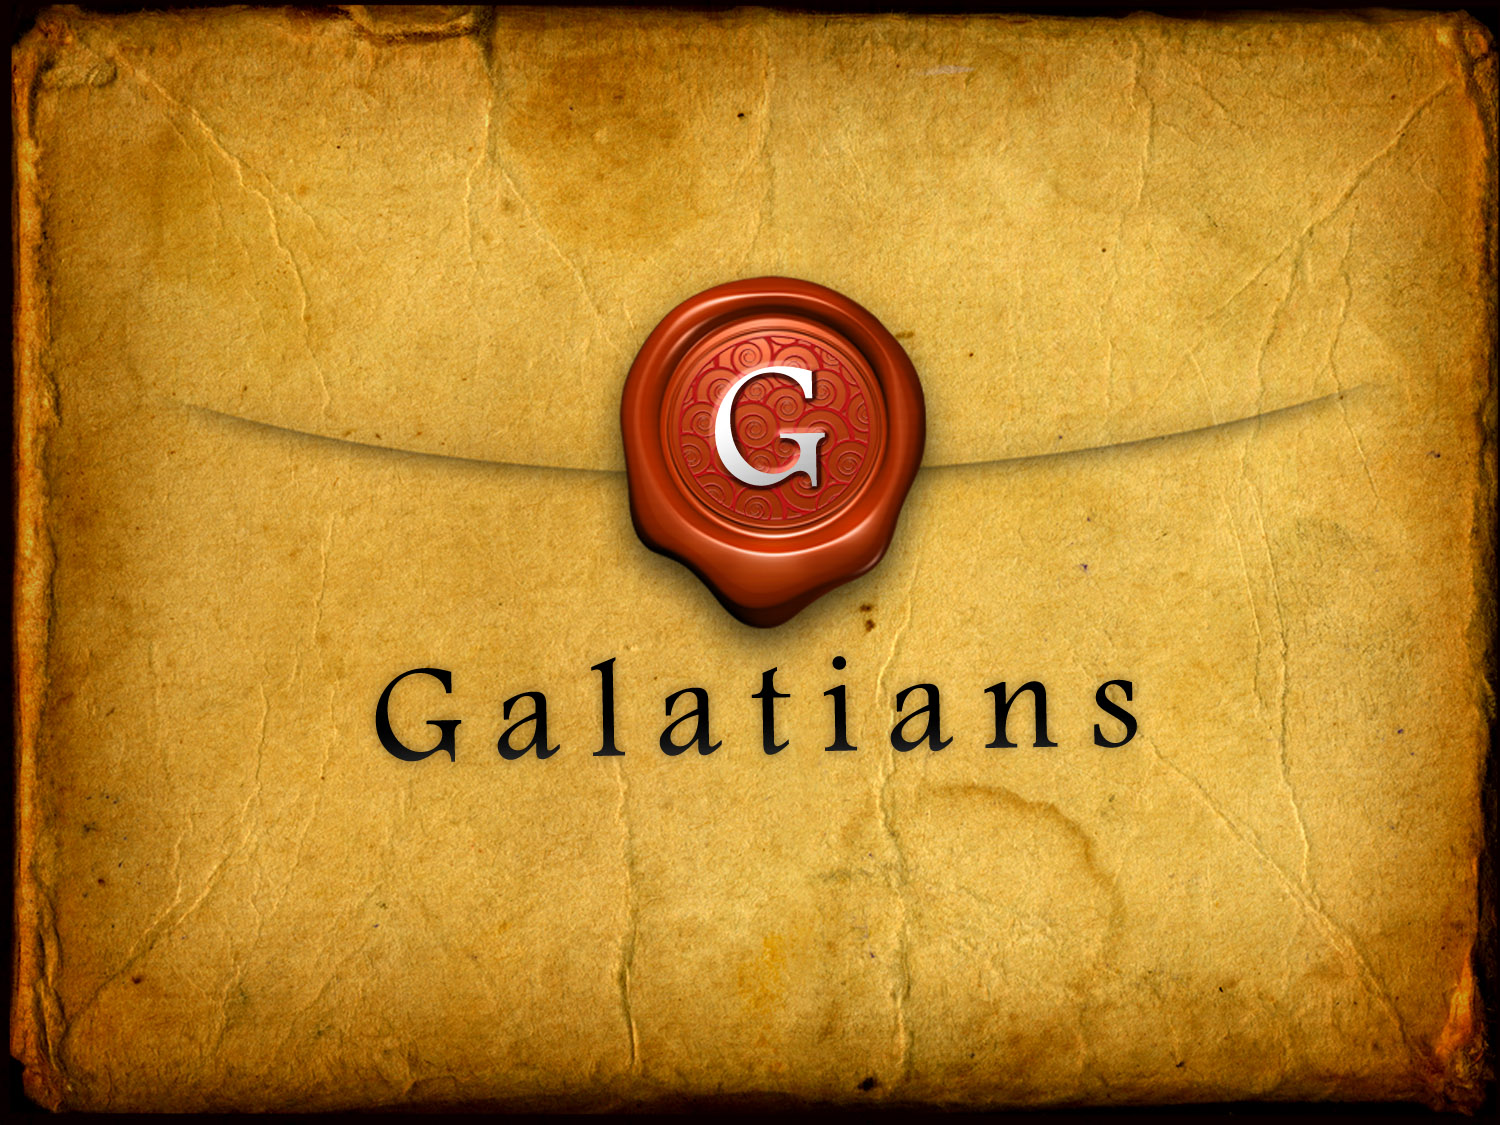 The Book of Galatians 6:1-5